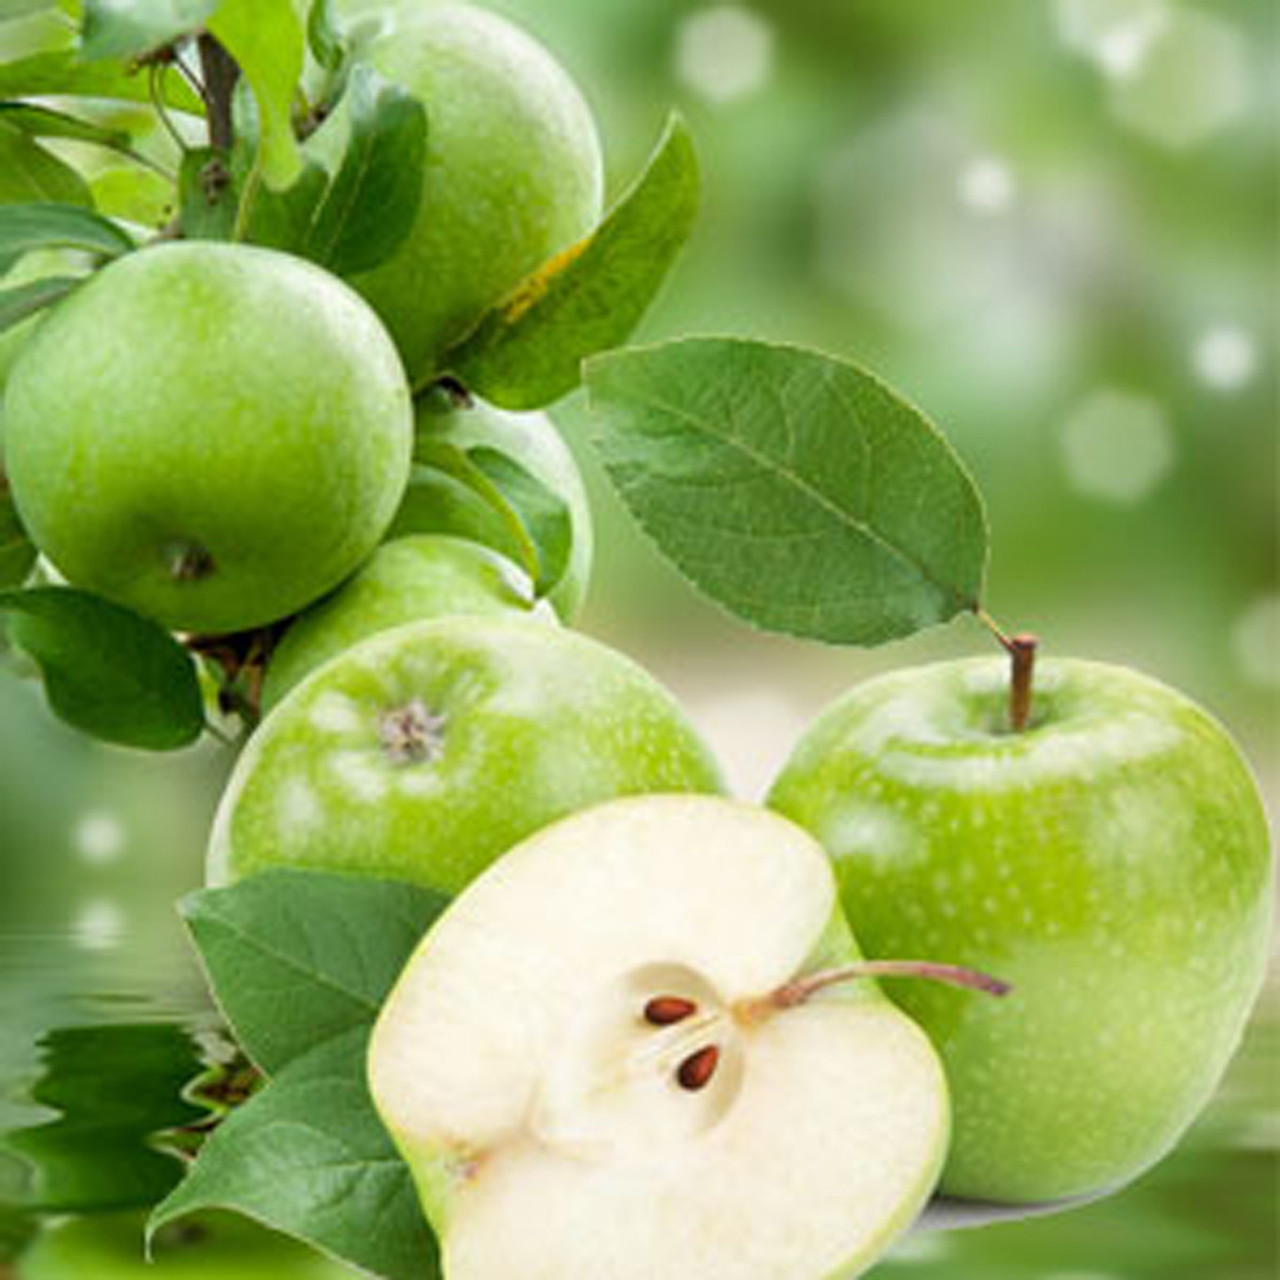 Nature's Oil Our Version of Yankee Candle Granny Smith Apple Fragrance Oil | 16 | Michaels